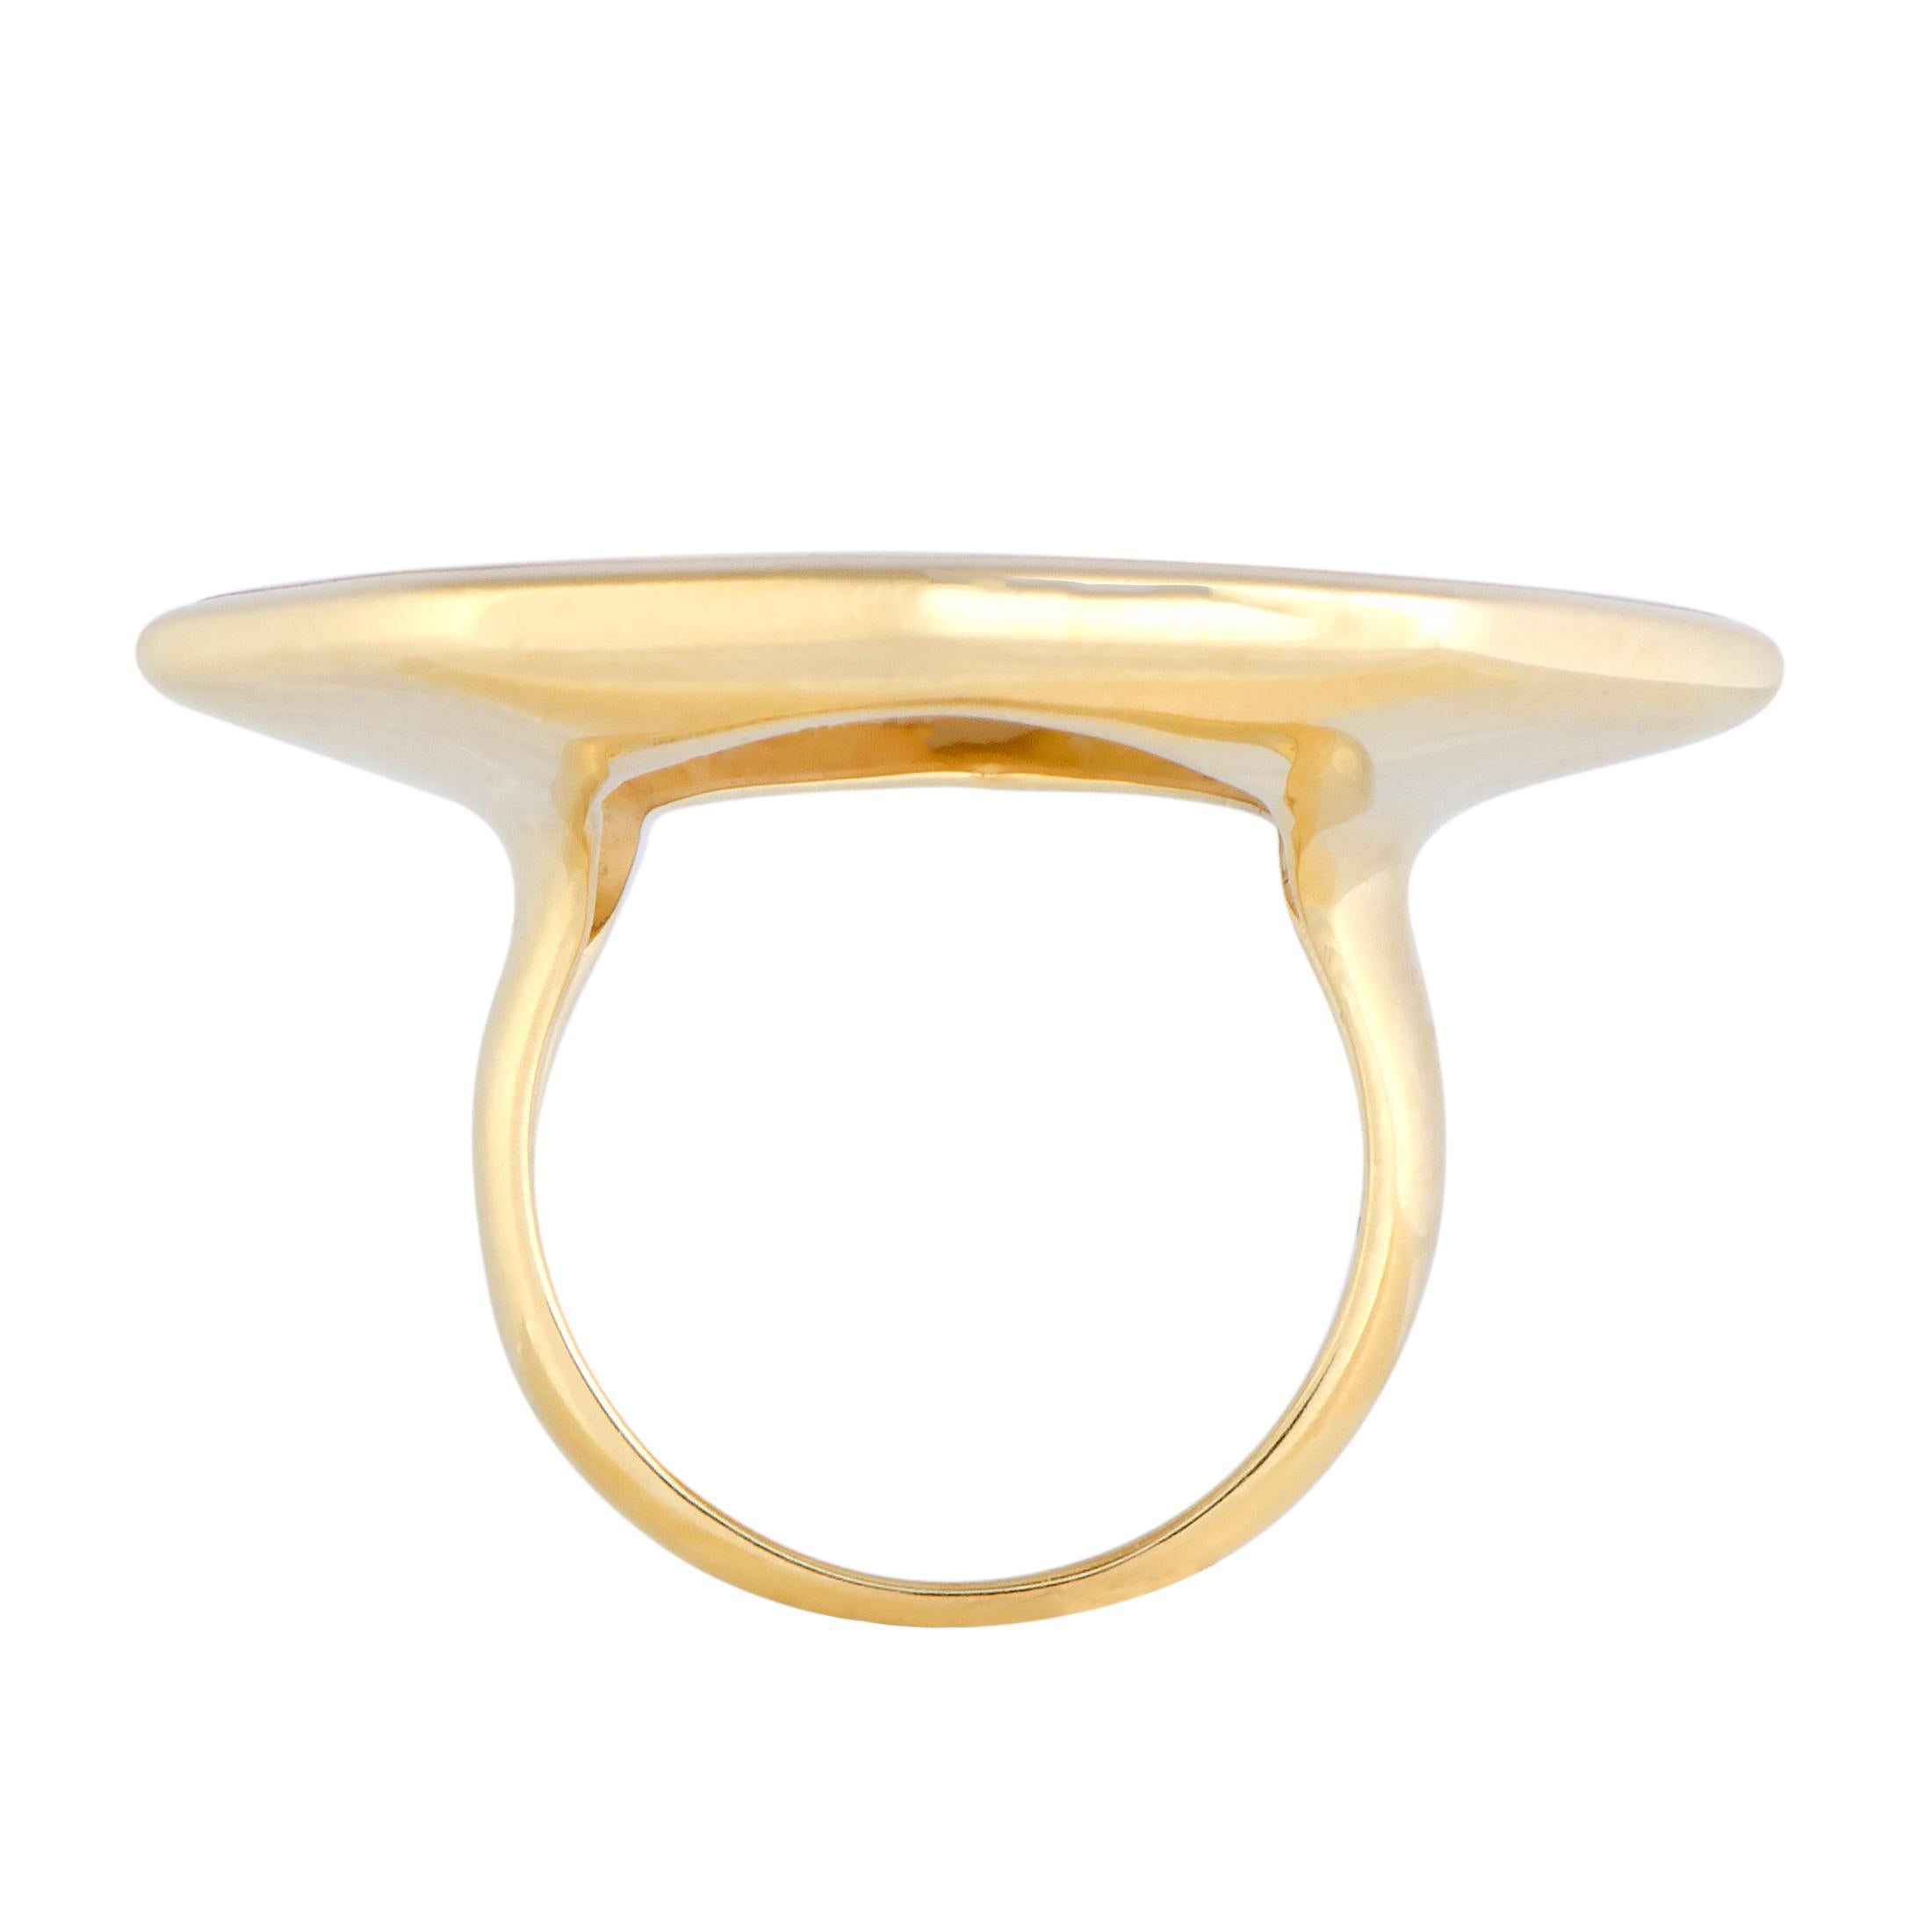 This spectacular Octagonal Ring by Ippolita is a combined embodiment of elegance and beauty, while featuring a sensationally alluring style. Its absolutely stunning design is beautifully crafted in the shimmering gleam of polished 18K yellow gold